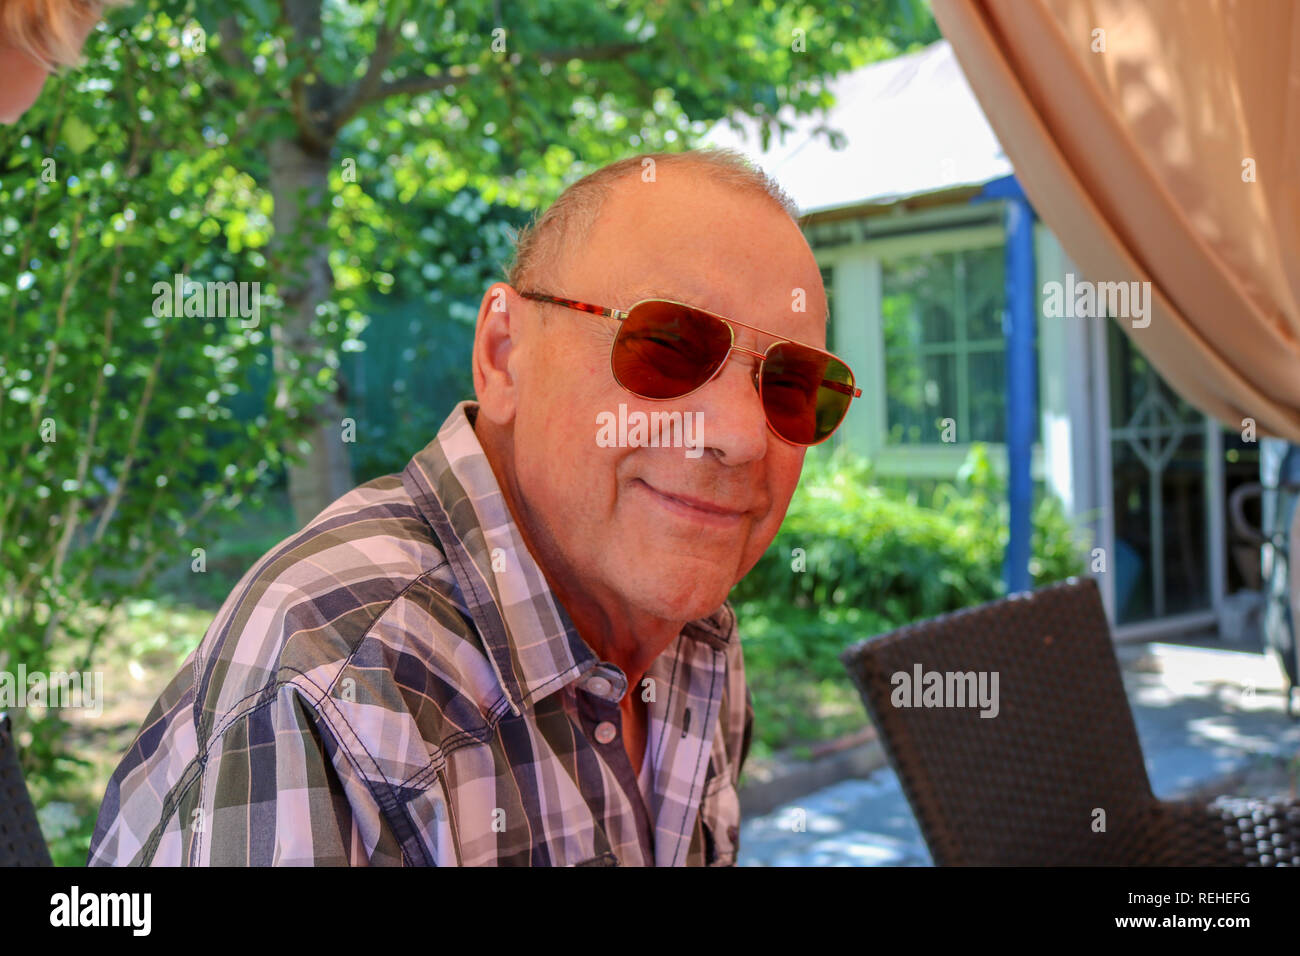 Portrait of smiling senior man with eyeglasses looking at camera Stock Photo